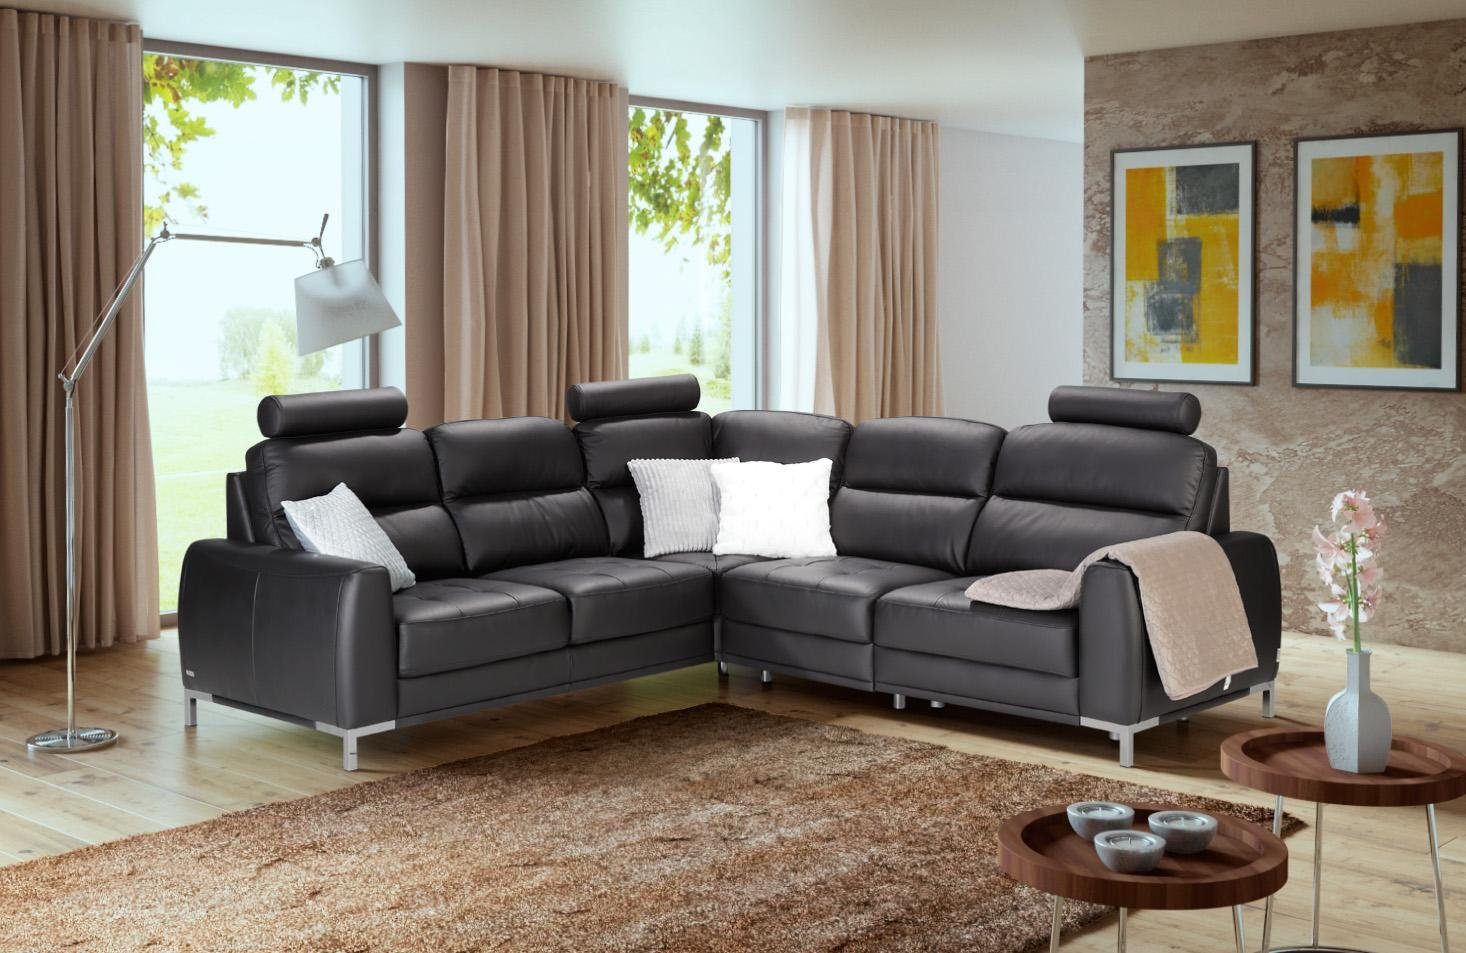 JVmoebel Ecksofa Verstellbares Ecksofa Couch Polster Multifunktions Relax Couch, Made in Europe